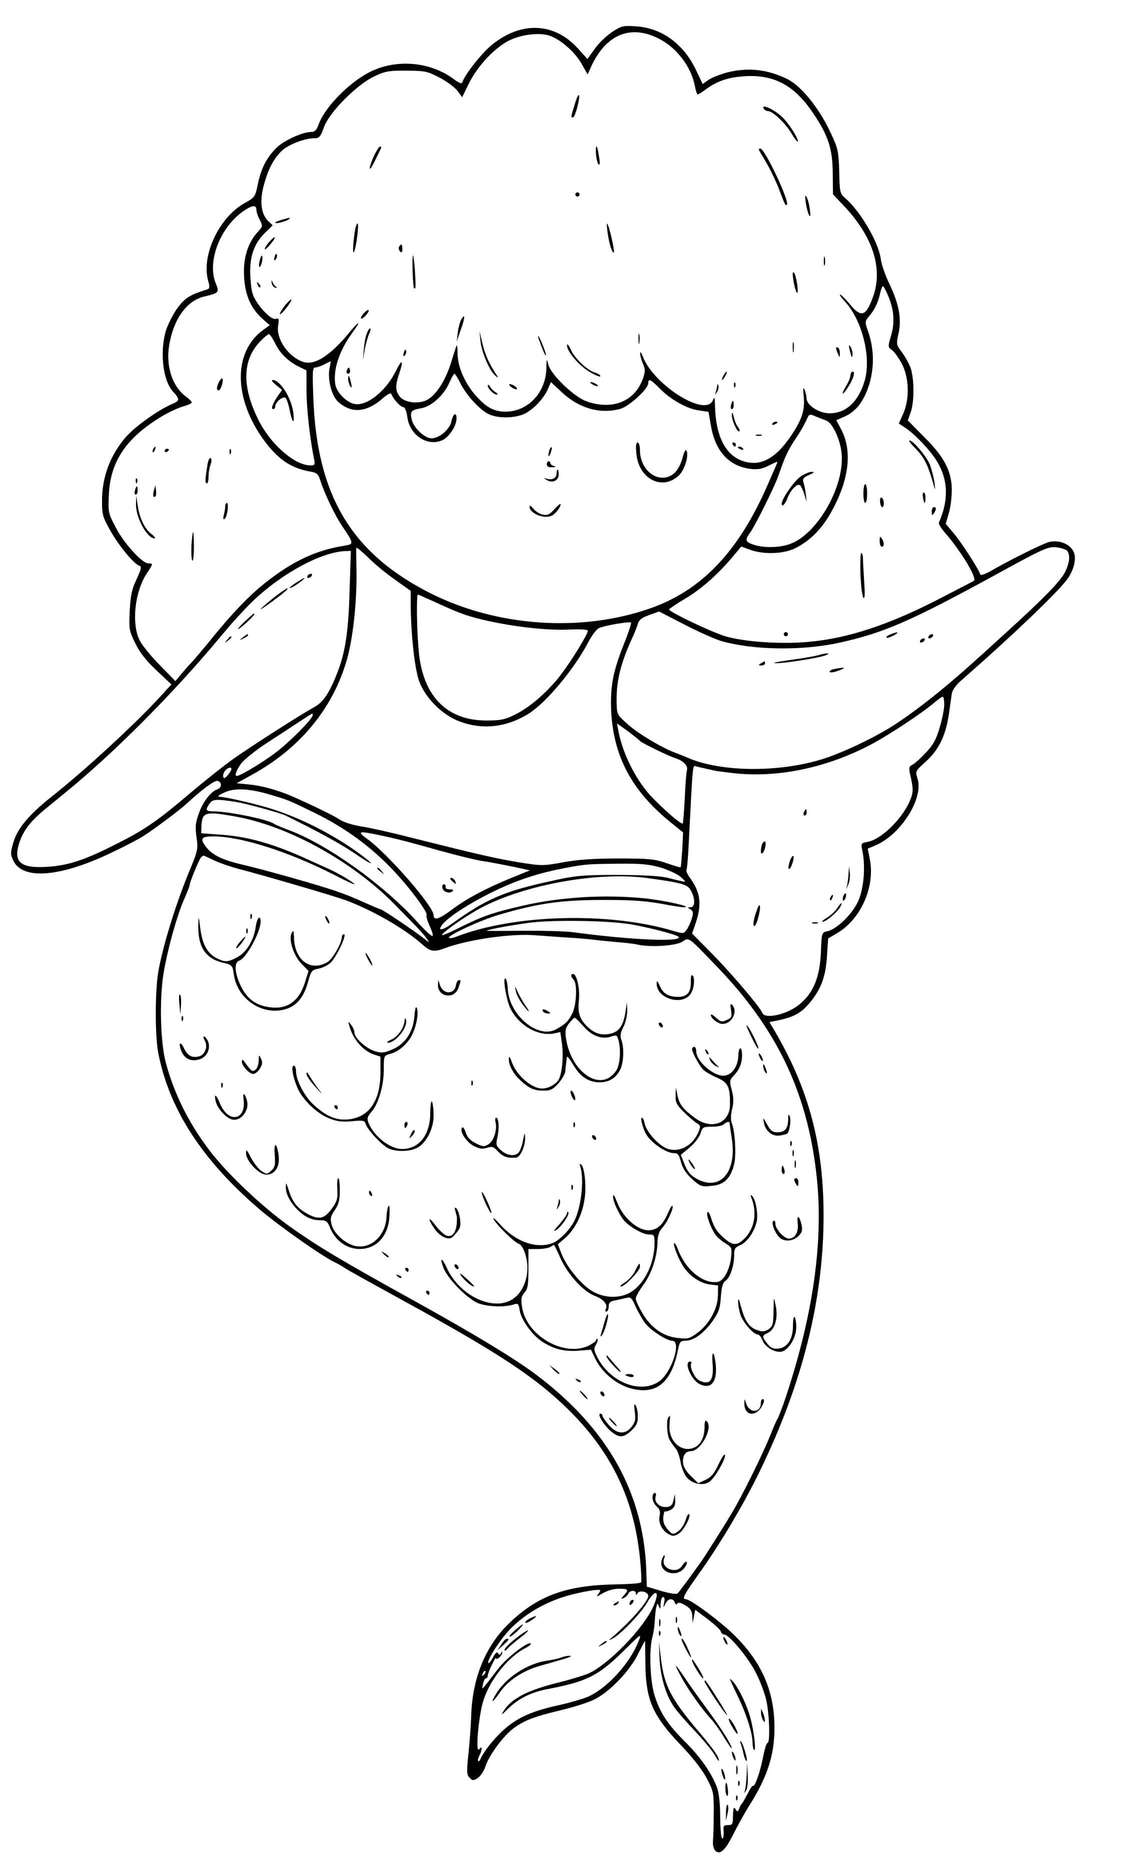 A Thoughtful Mermaid With Her Eyes Closed